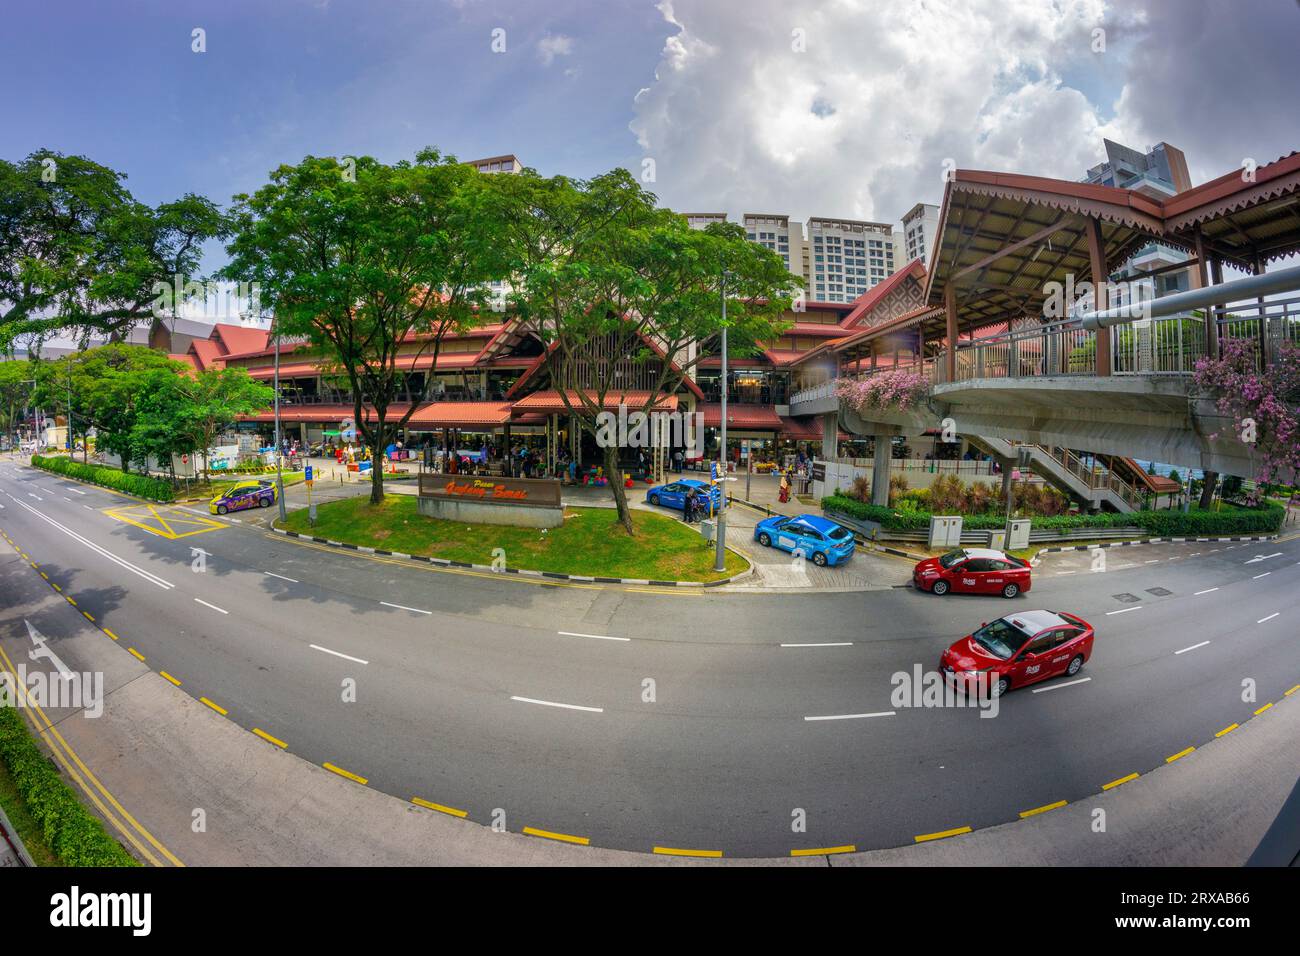 View of the exterior of Geylang Serai Markets. Singapore Stock Photo